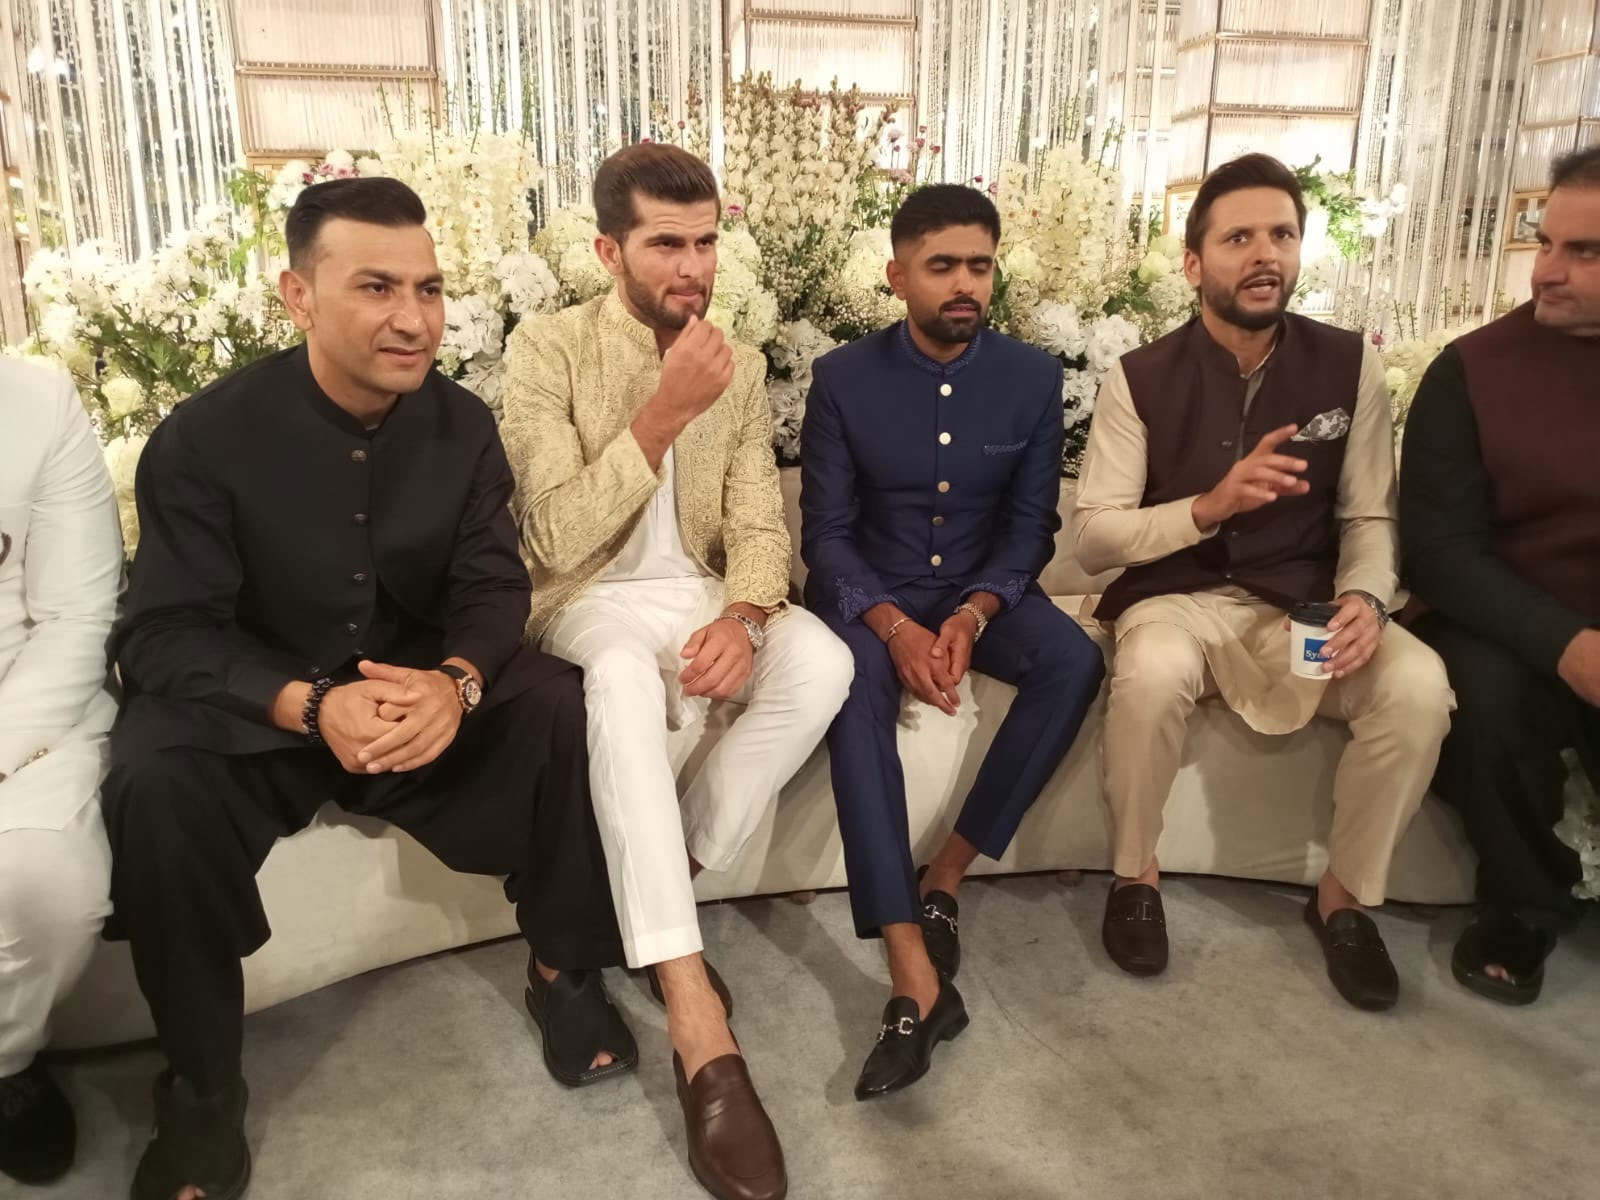 Shaheen Shah Afridi (third left) sits beside Babar Azam (centre) and Shahid Afridi (second right). — Author